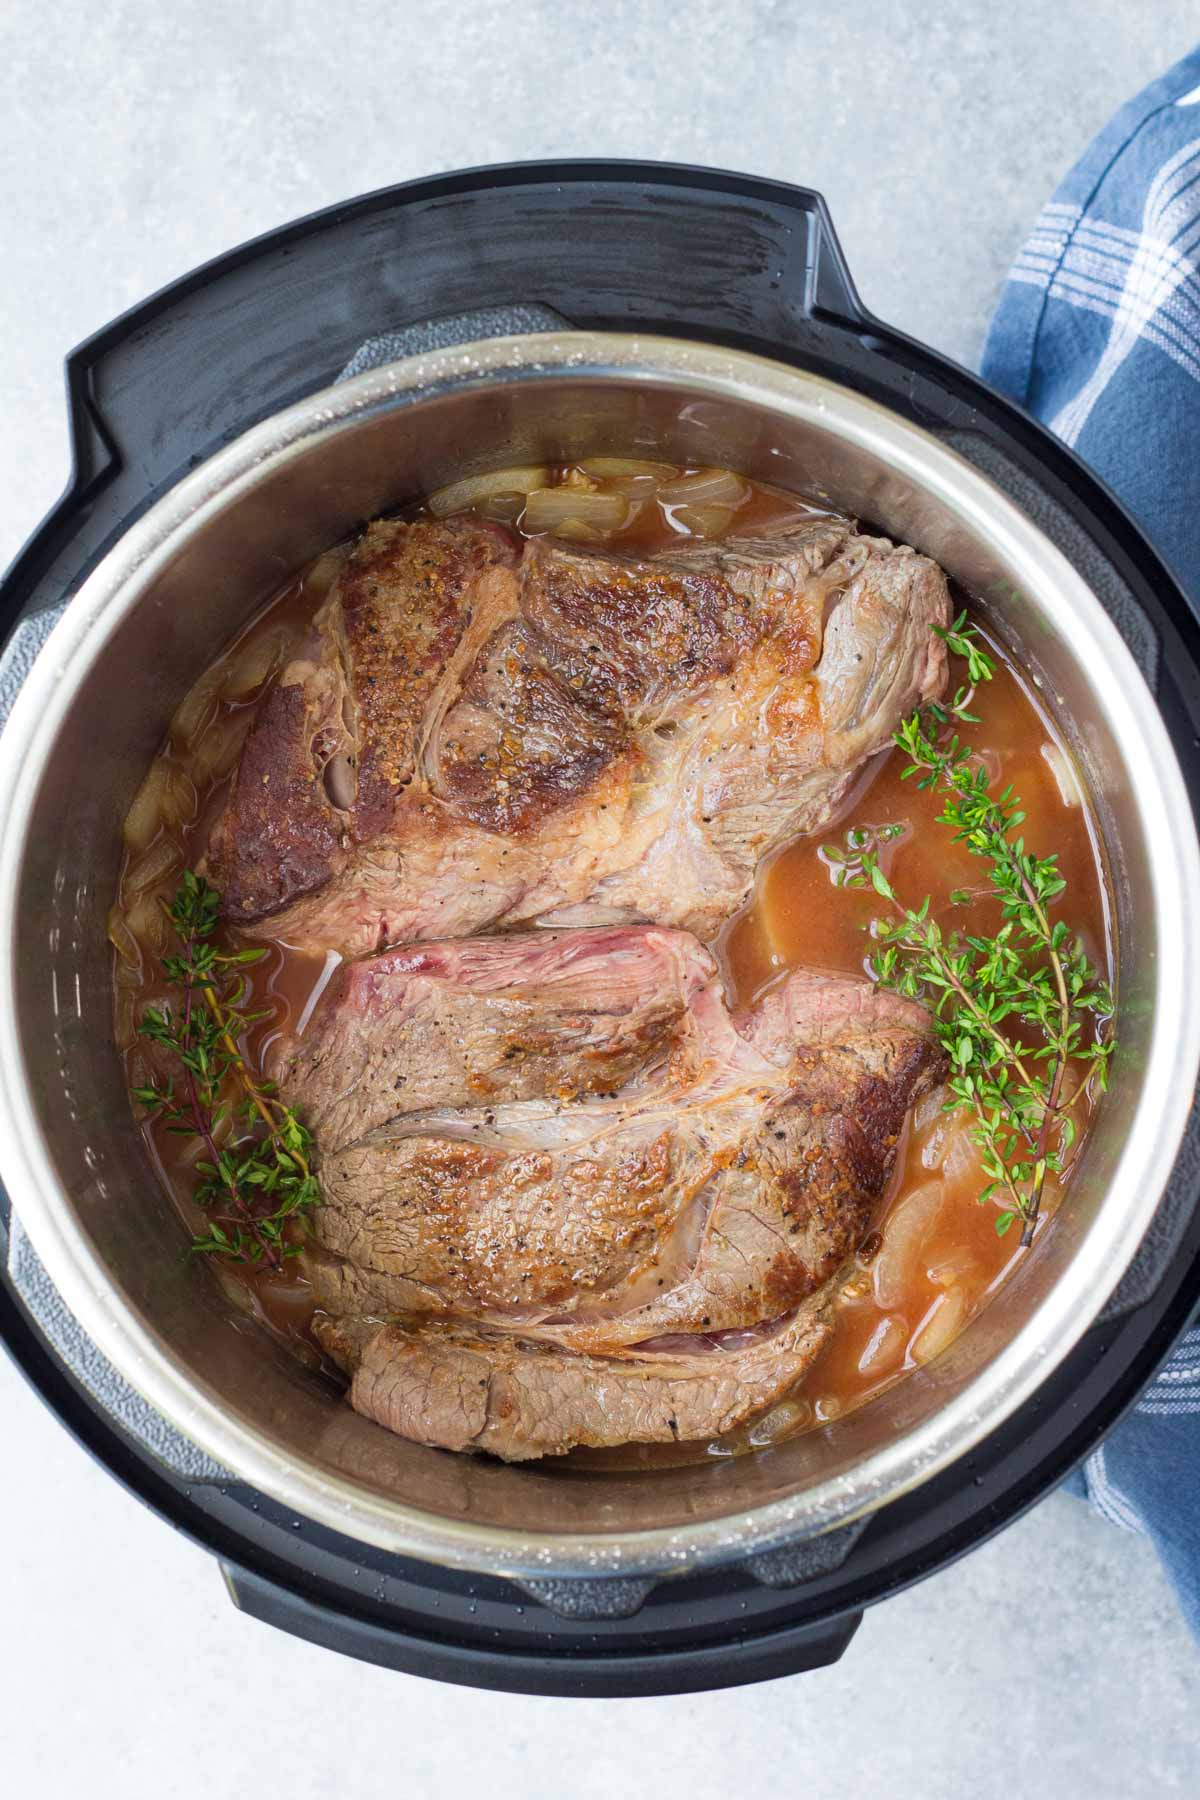 Beef and other ingredients in the instant pot before pressure cooking.